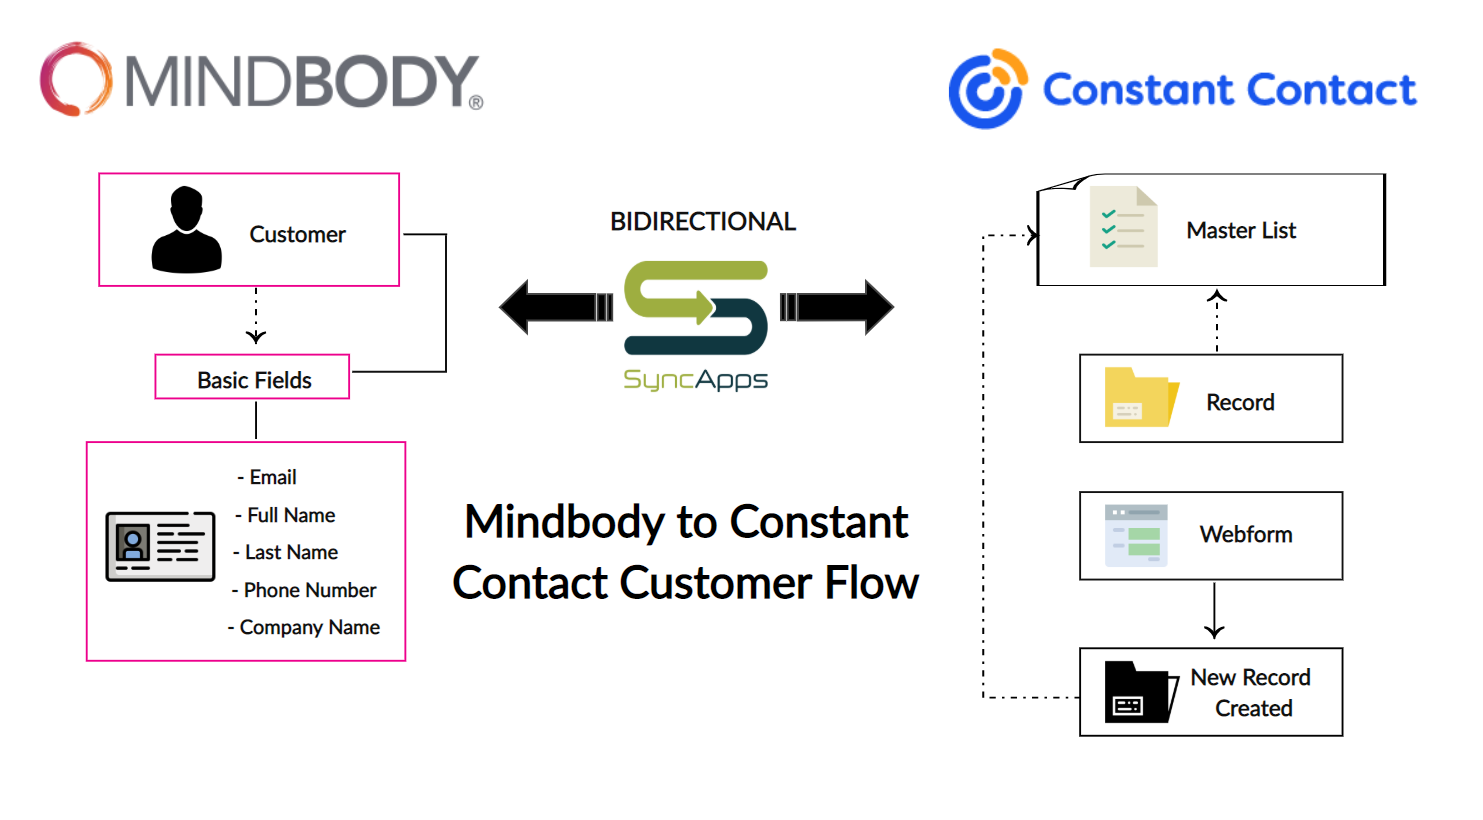 Mindbody for Constant Contact Customer Flow